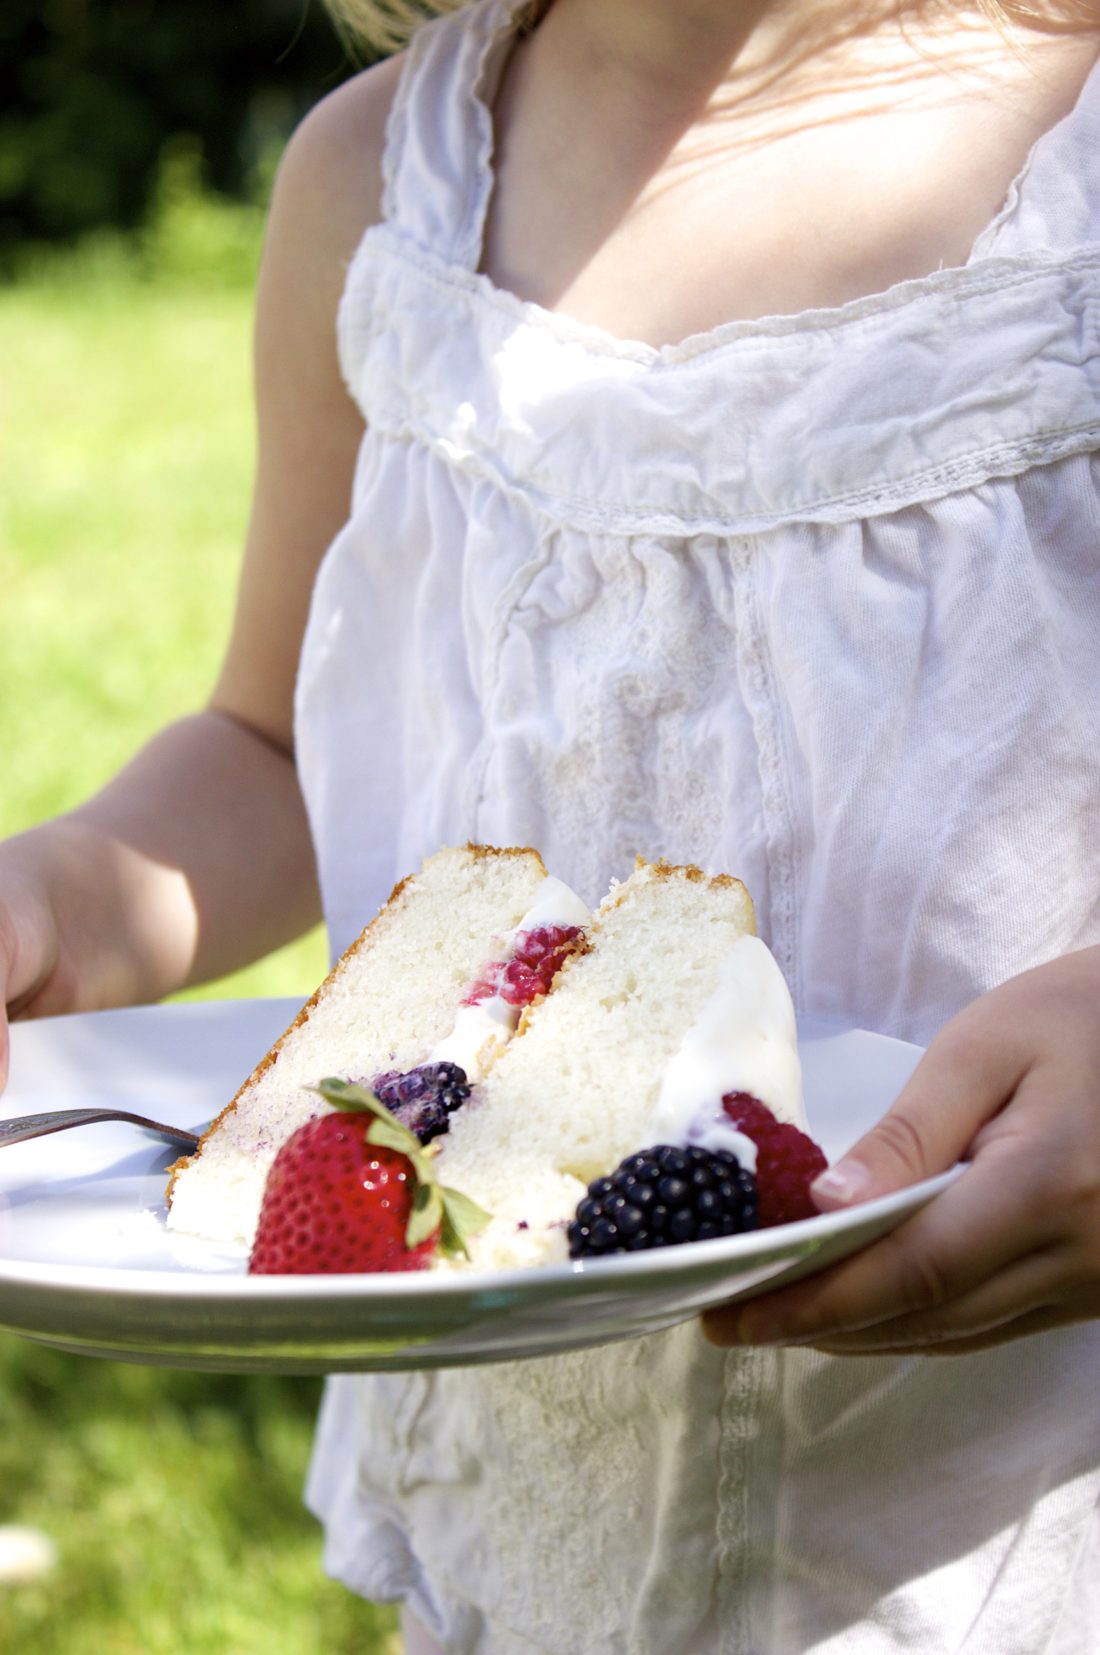 The Perfect Tender White Cake (with whipped cream cheese cloud frosting & berries)